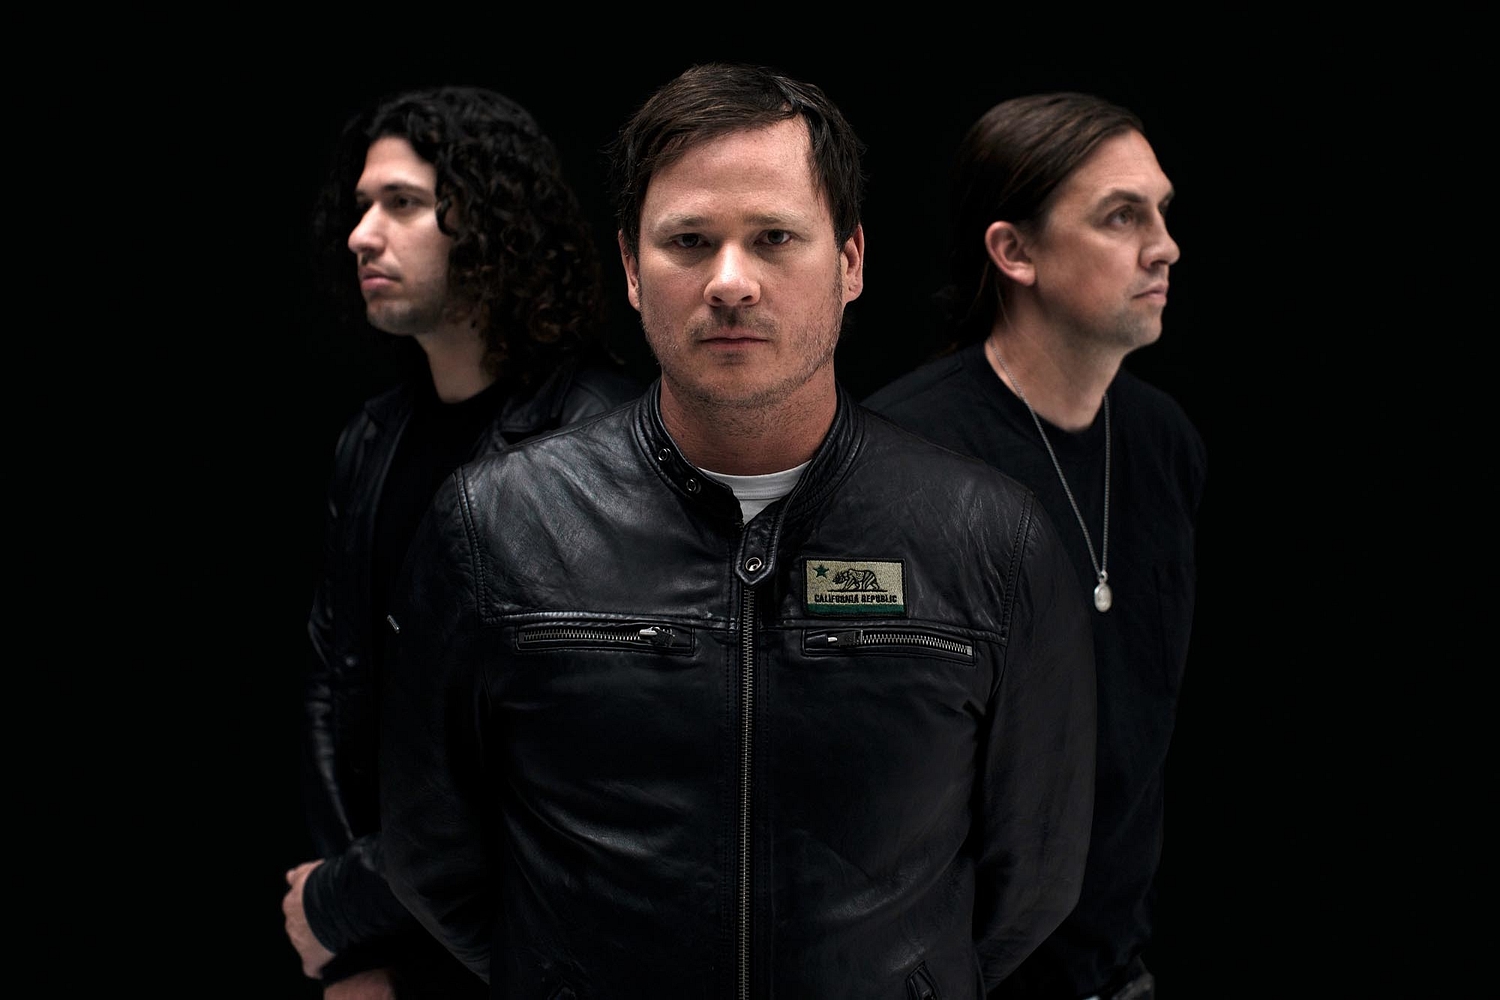 Angels & Airwaves return with new song ‘Rebel Girl’, announce US tour